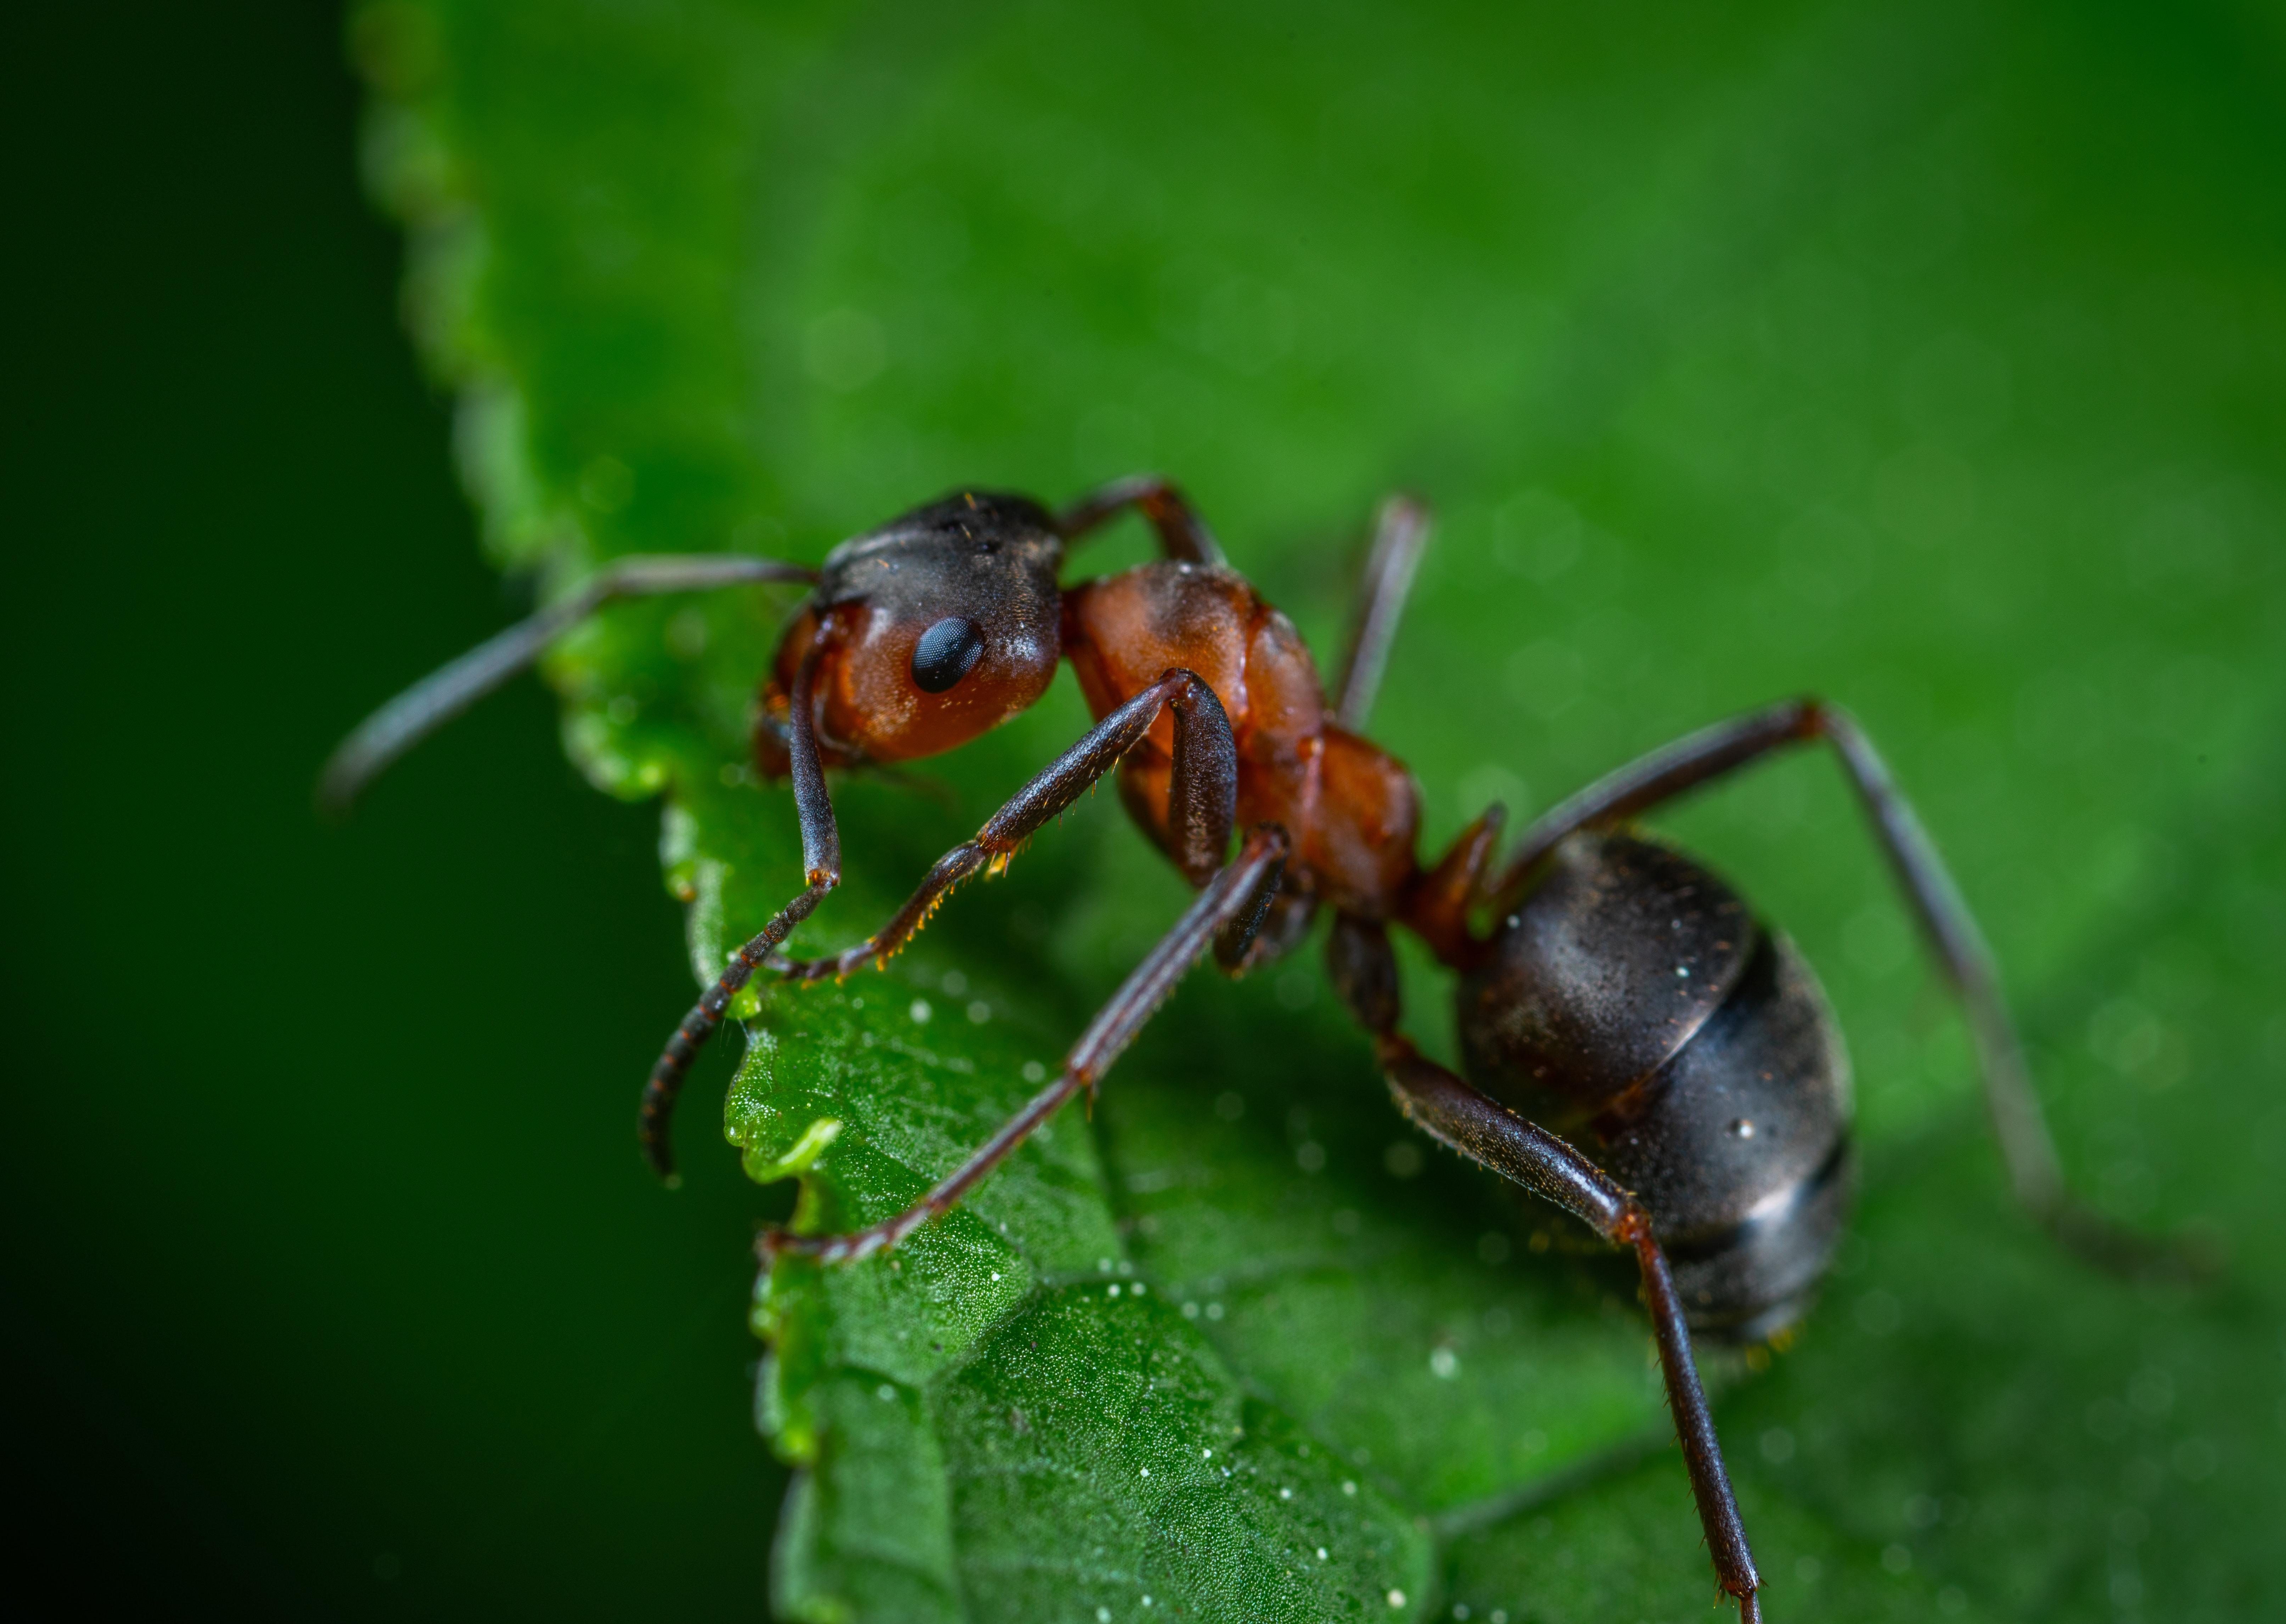 Best Ant Photo · 100% Free Downloads